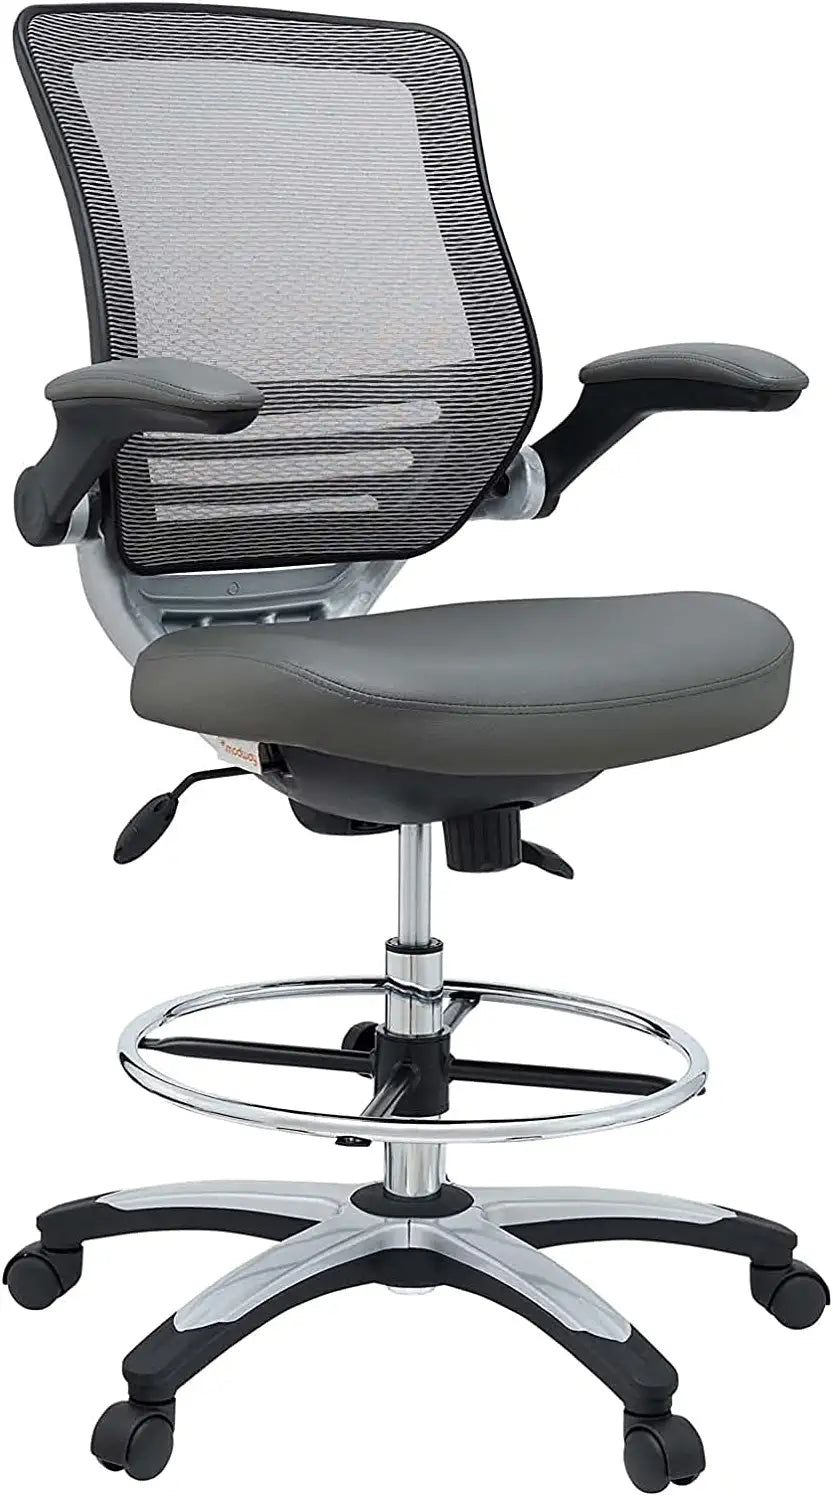 Modway EEI-211 Edge Drafting Chair - Reception Desk Chair - Flip-Up Arm Drafting Chair in Gray